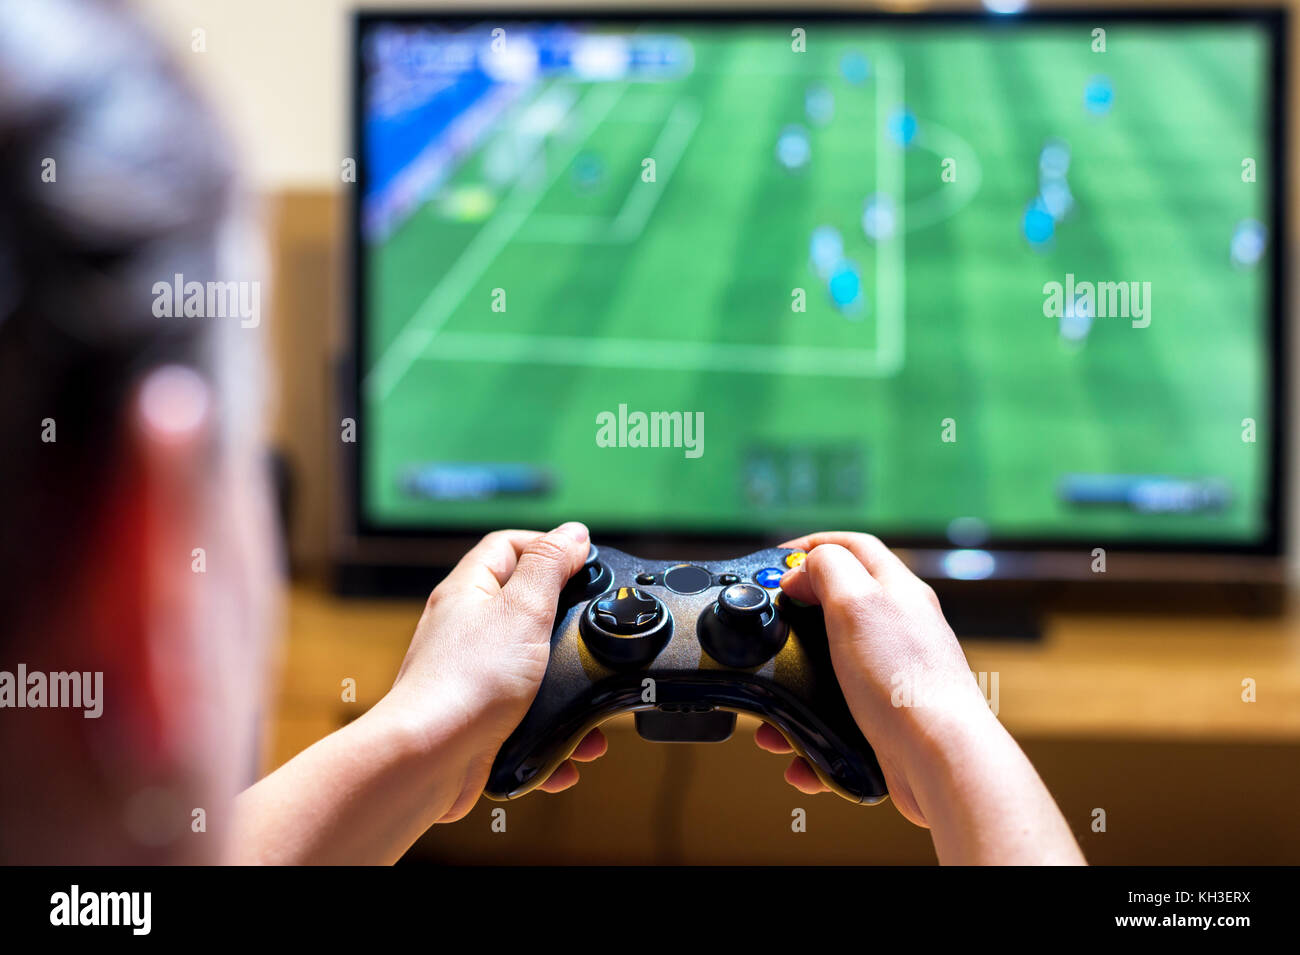 Close up of female hands holding a joystick controller while playing a video games at home, narrow depth of field on hands Stock Photo